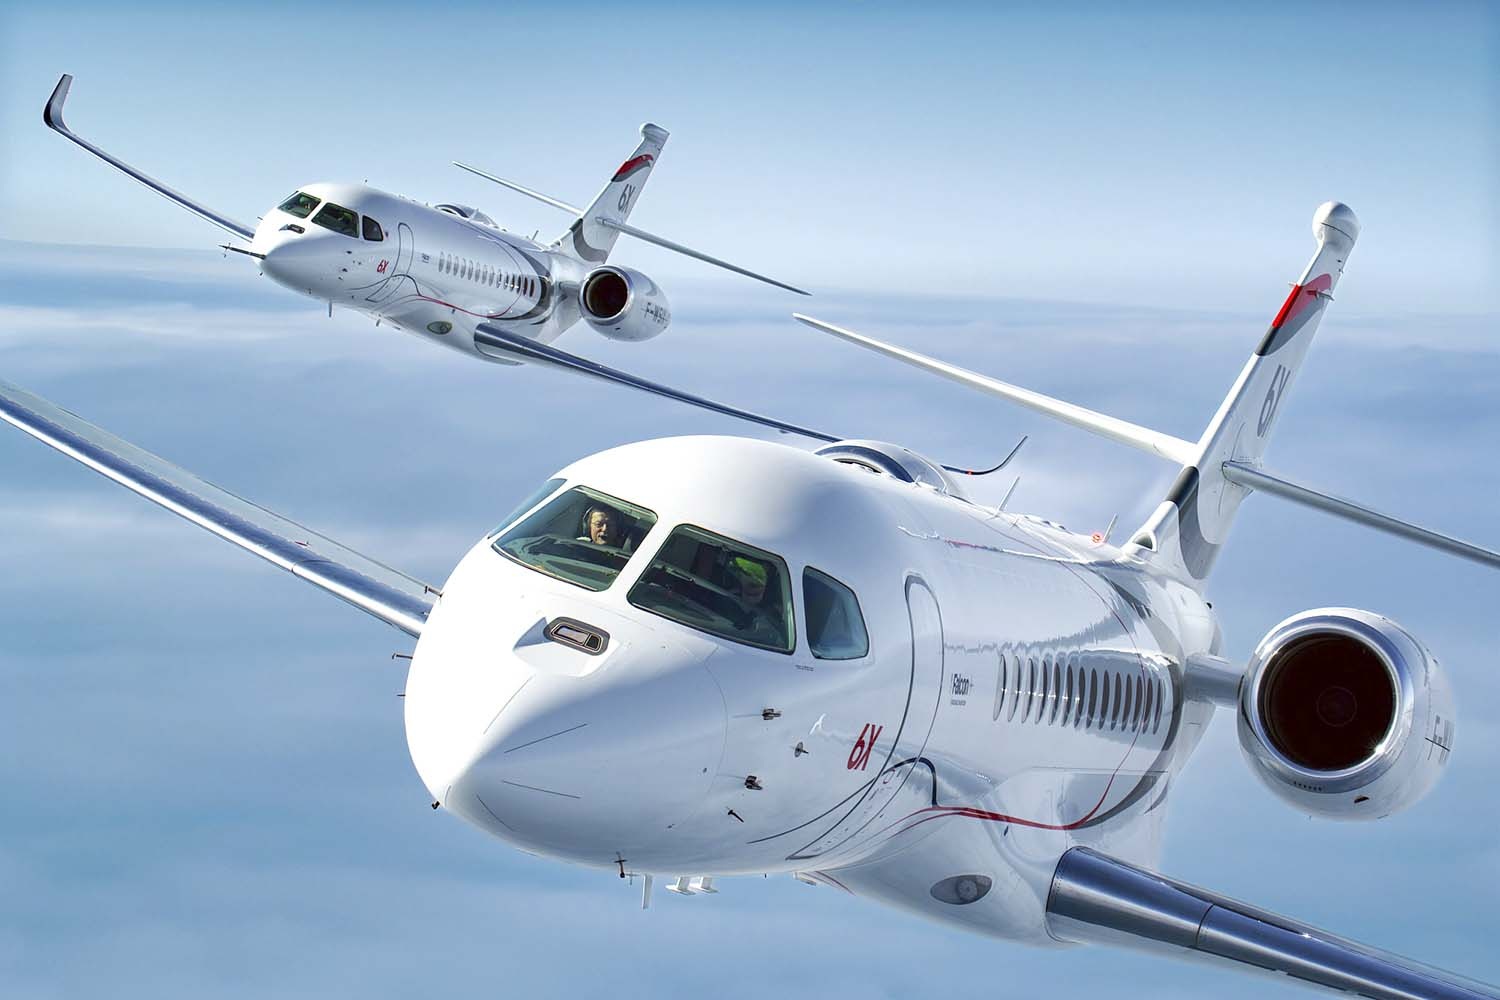 Dassault Aviation has launched the new Falcon 6X business jet